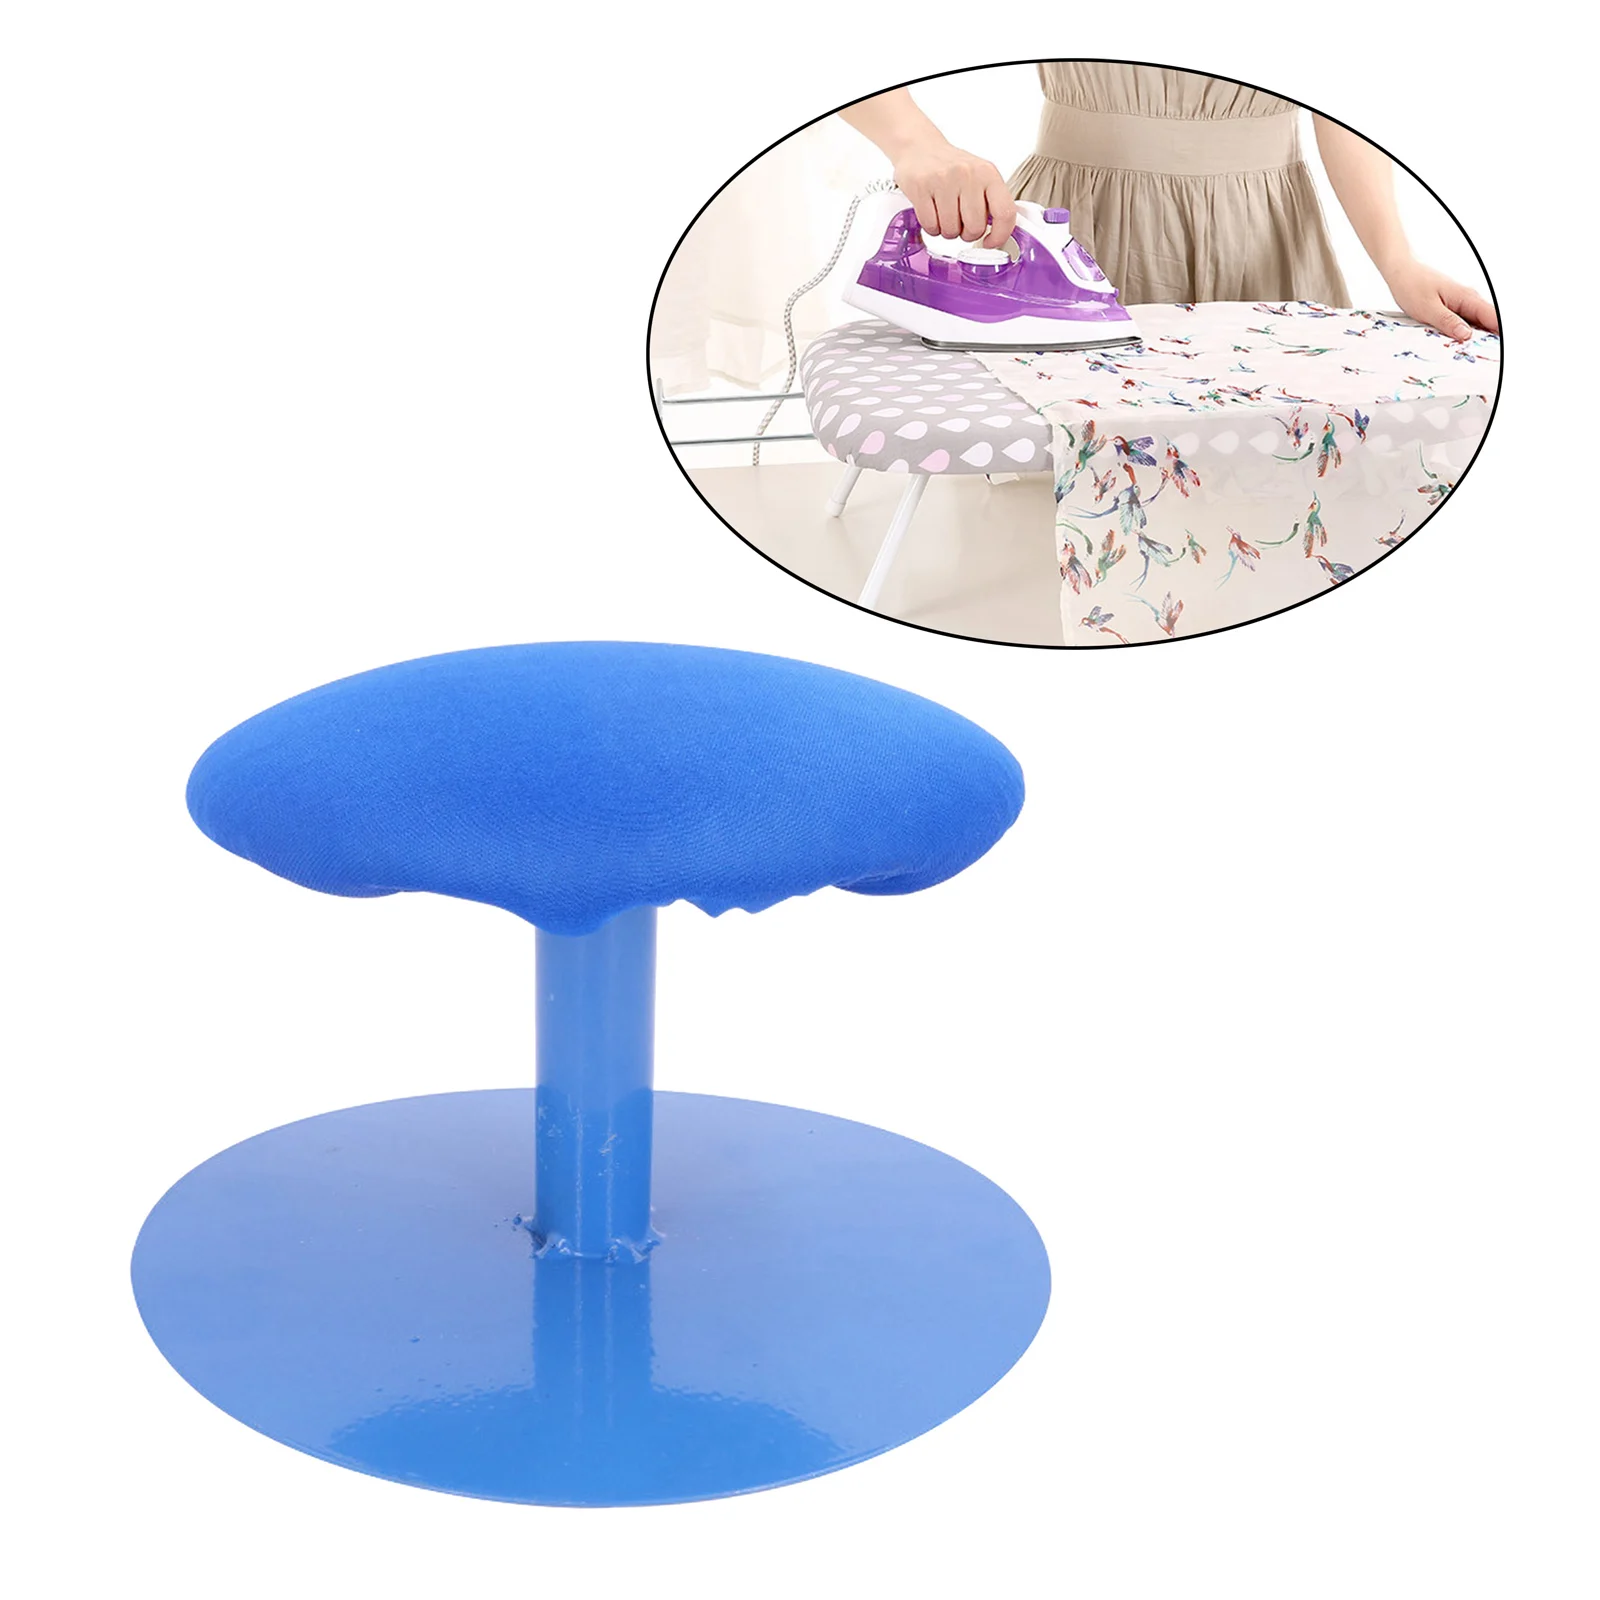 Pro Travel Mini Ironing Board Heat Resistant Home Cuffs Collars Handling Table Tailors Dressmaker Tools for Ironing Household